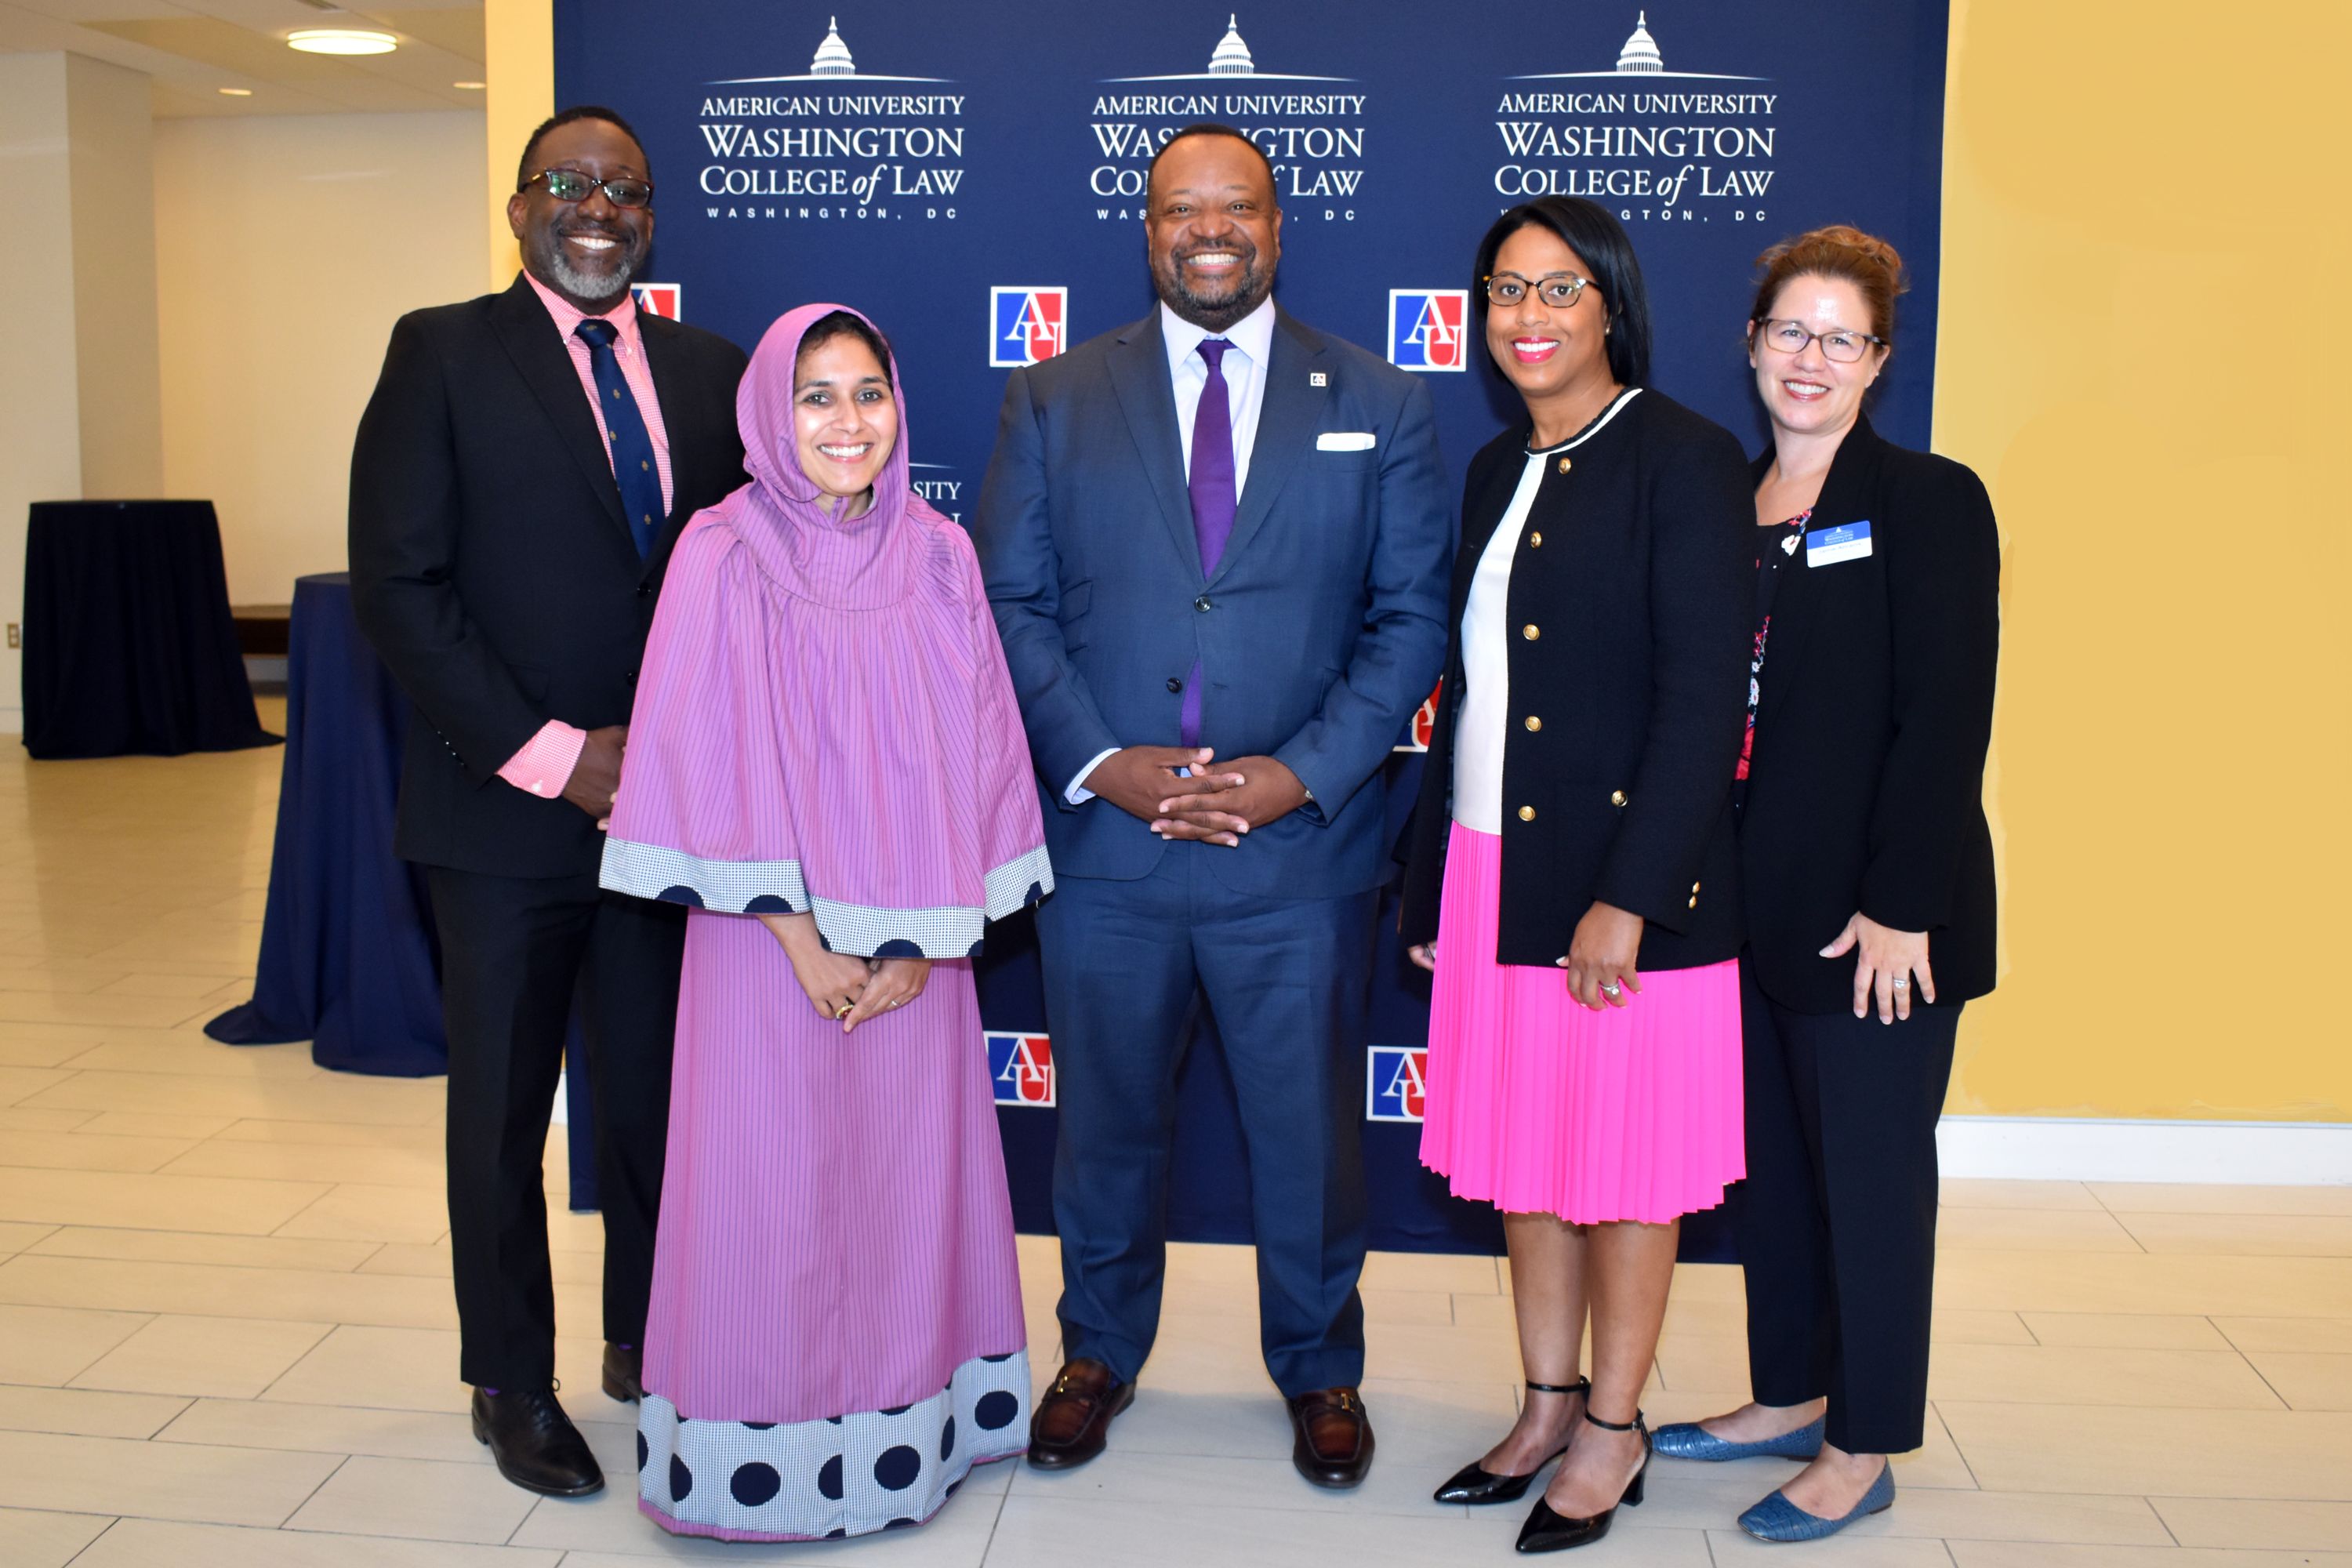 Judge Zubari Williams '03 (left), Fatema Merchant '08 (second from left), Dean Roger A. Fairfax Jr. (middle), Erica Gerson '04 (second from right), and Jamie Abrams '02 (right)